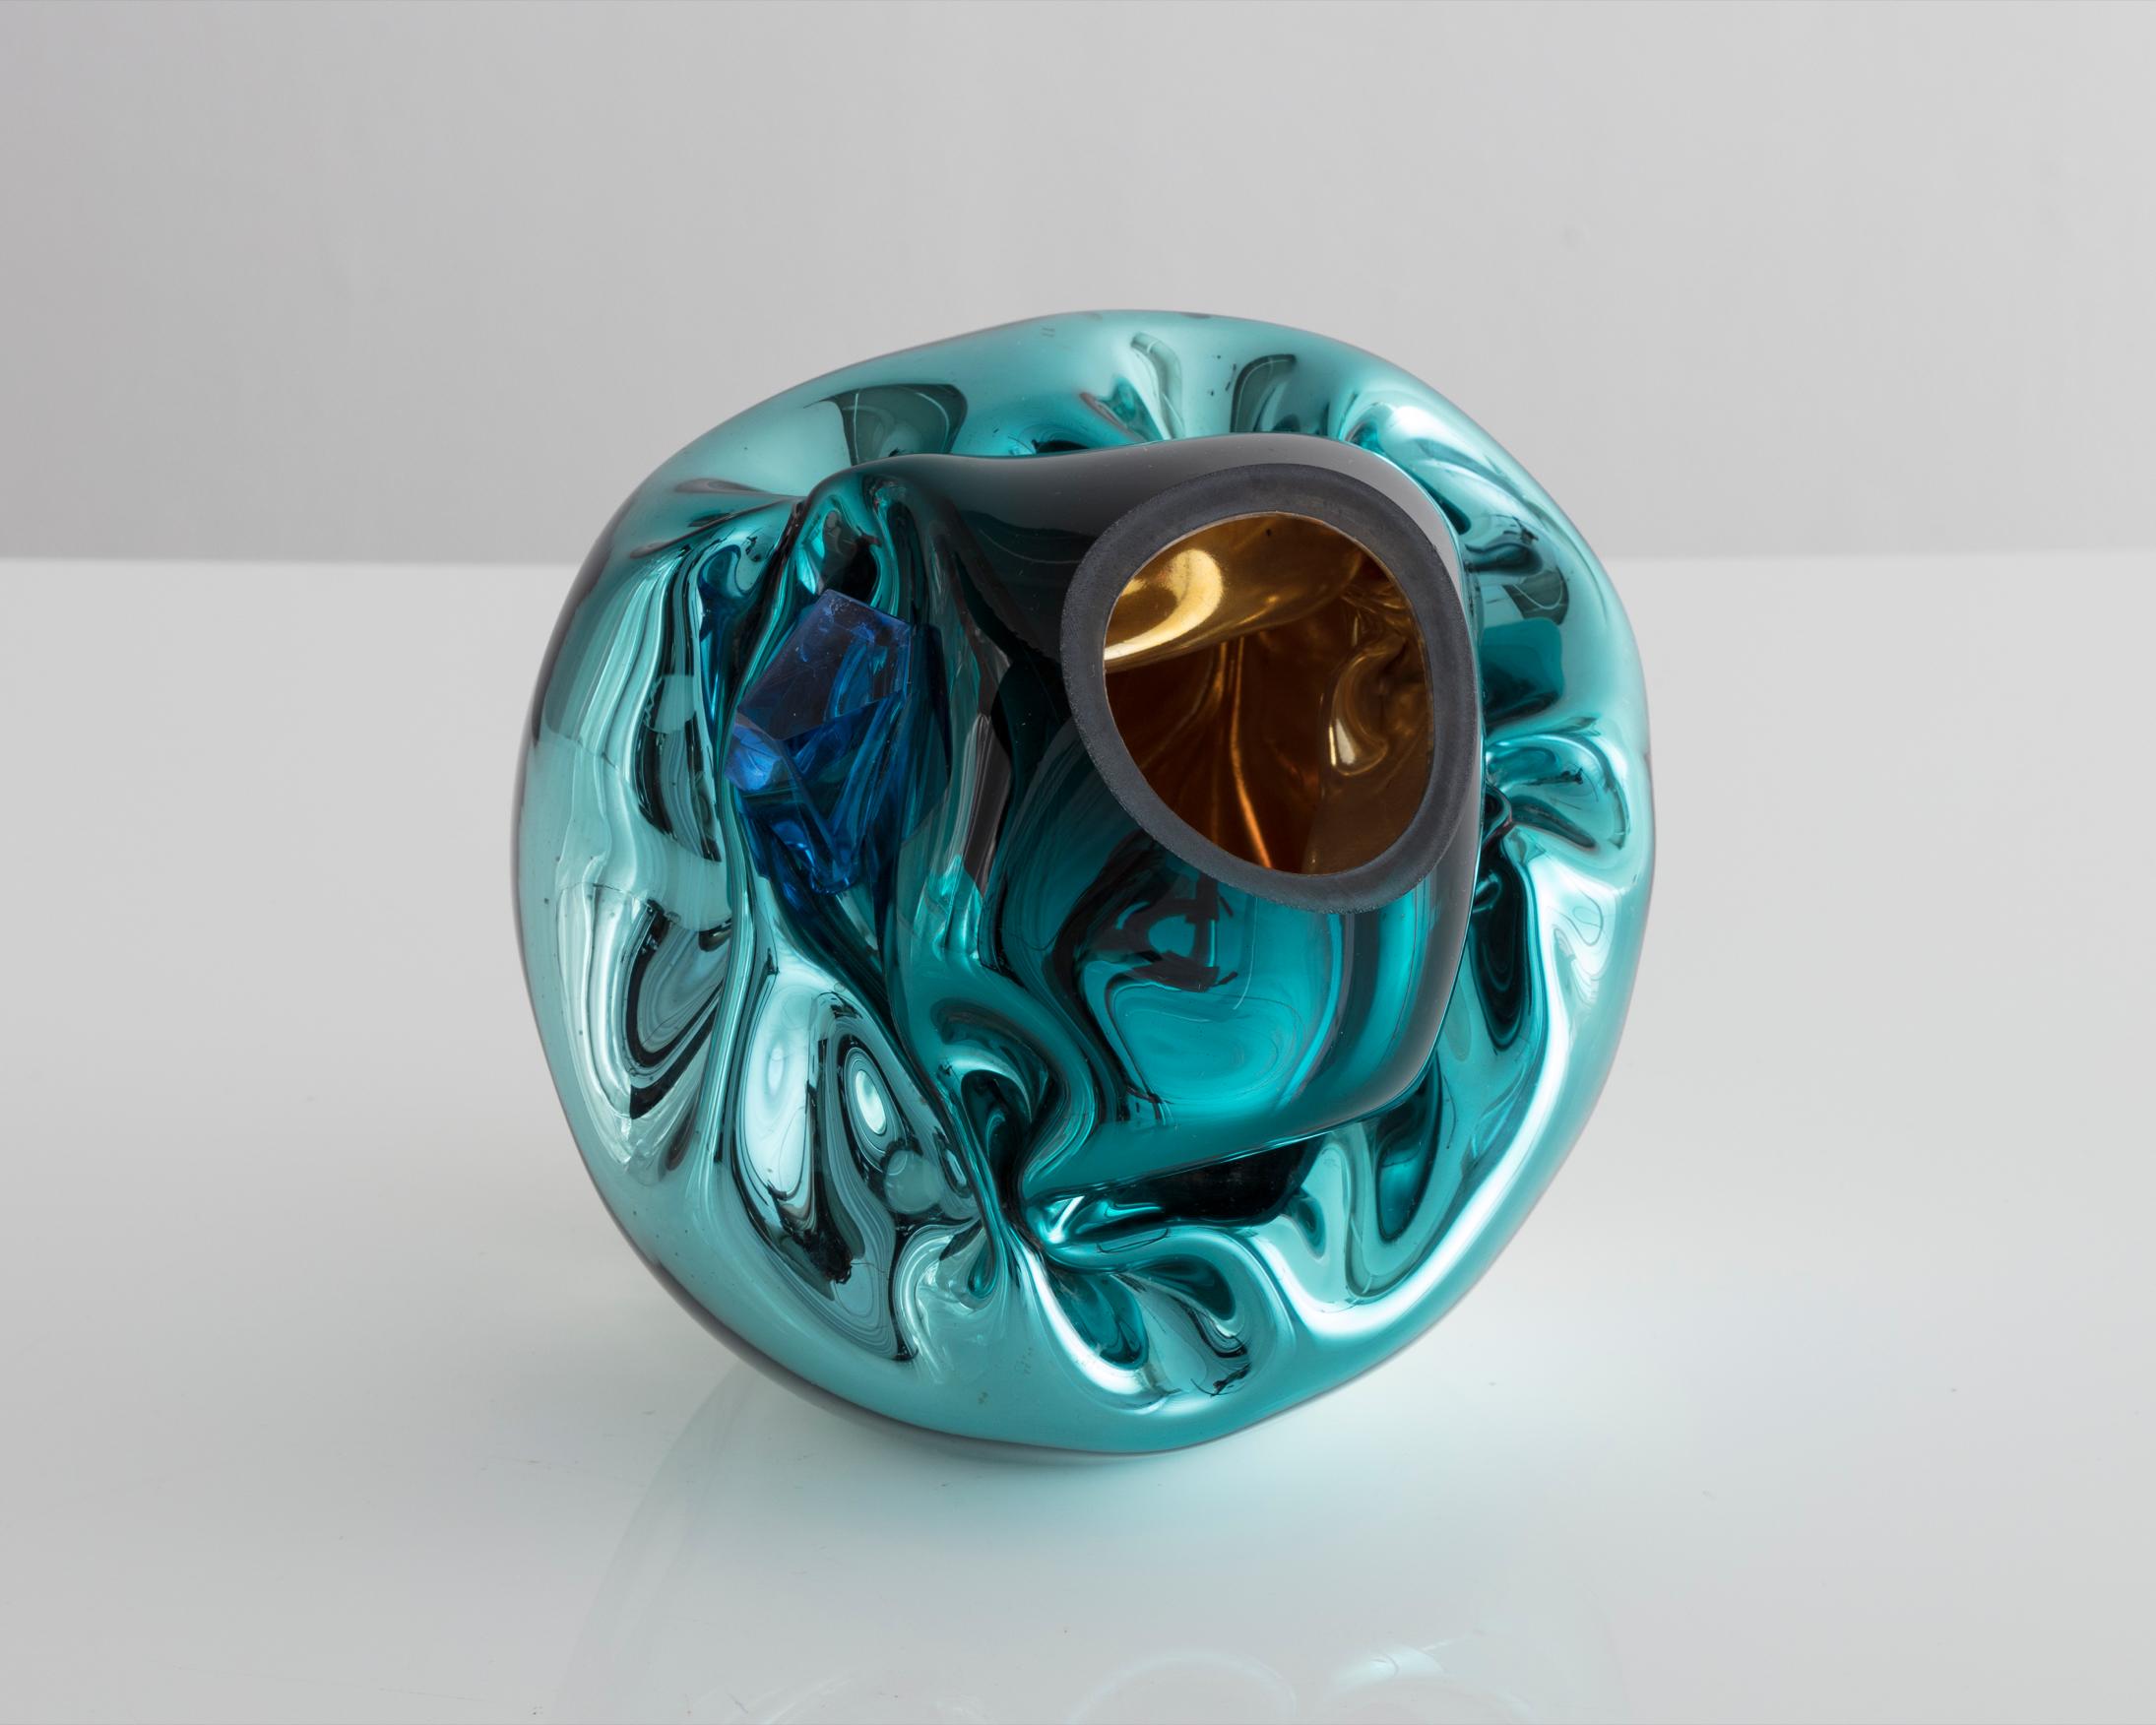 Unique petite crumpled sculptural vessel in silver and turquoise mirrorized hand blown glass with applied glass crystal. Designed and made by Jeff Zimmerman, USA, 2017.

Limited number available. Please note that each item may differ slightly in